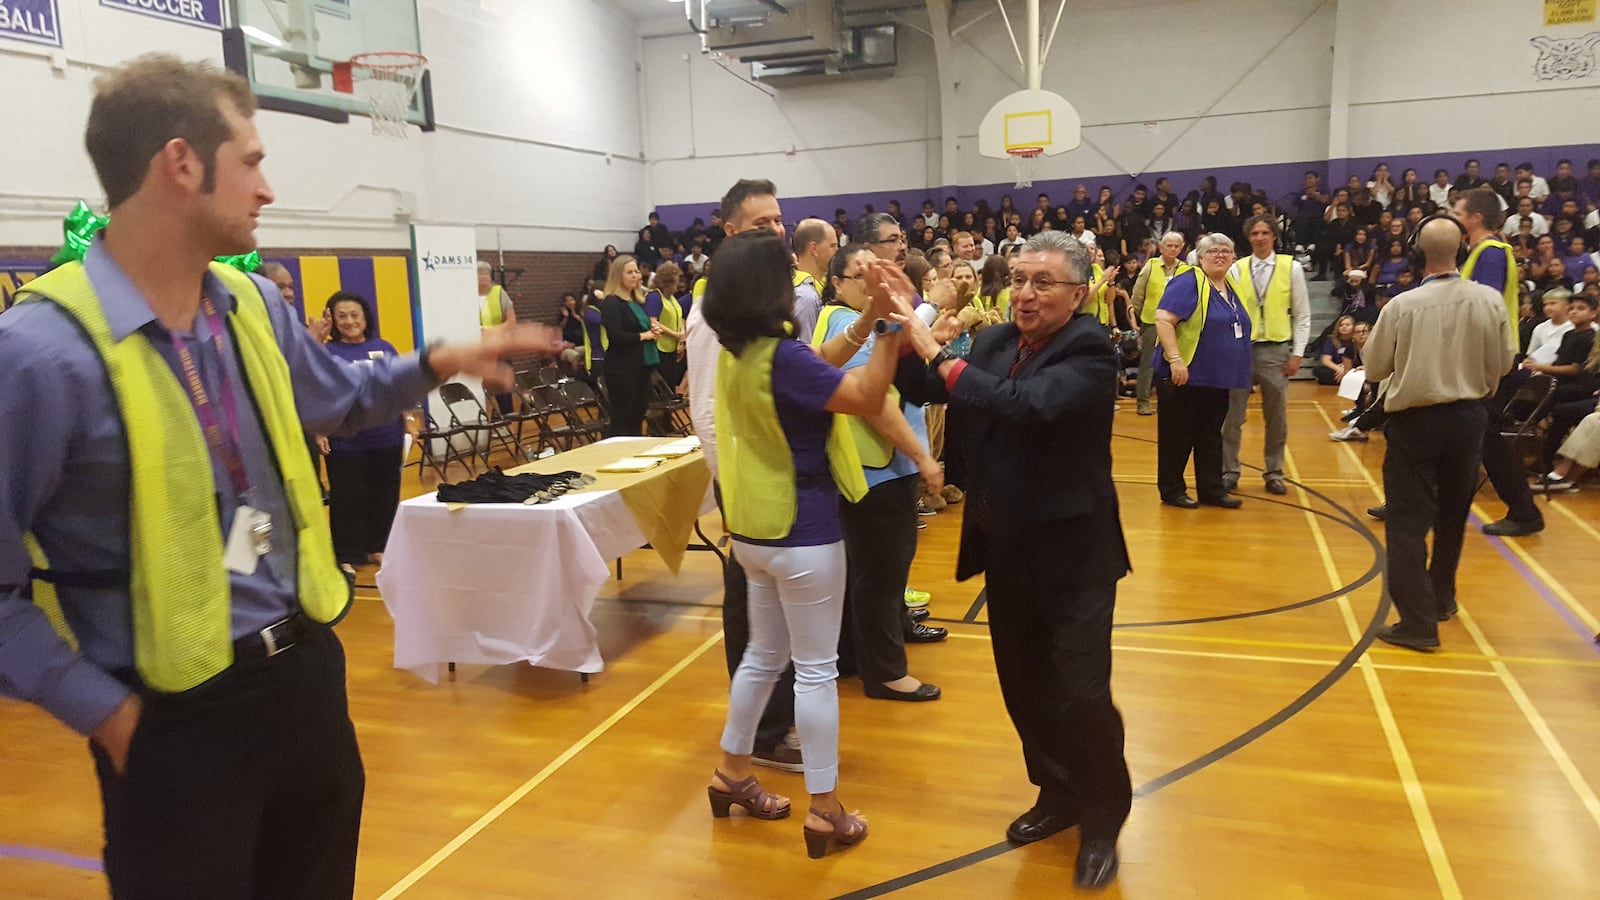 Adams 14 Superintendent Javier Abrego celebrates with teachers at Kearney Middle School during an event highlighting the school's rating in August 2017. (Photo by Yesenia Robles, Chalkbeat)